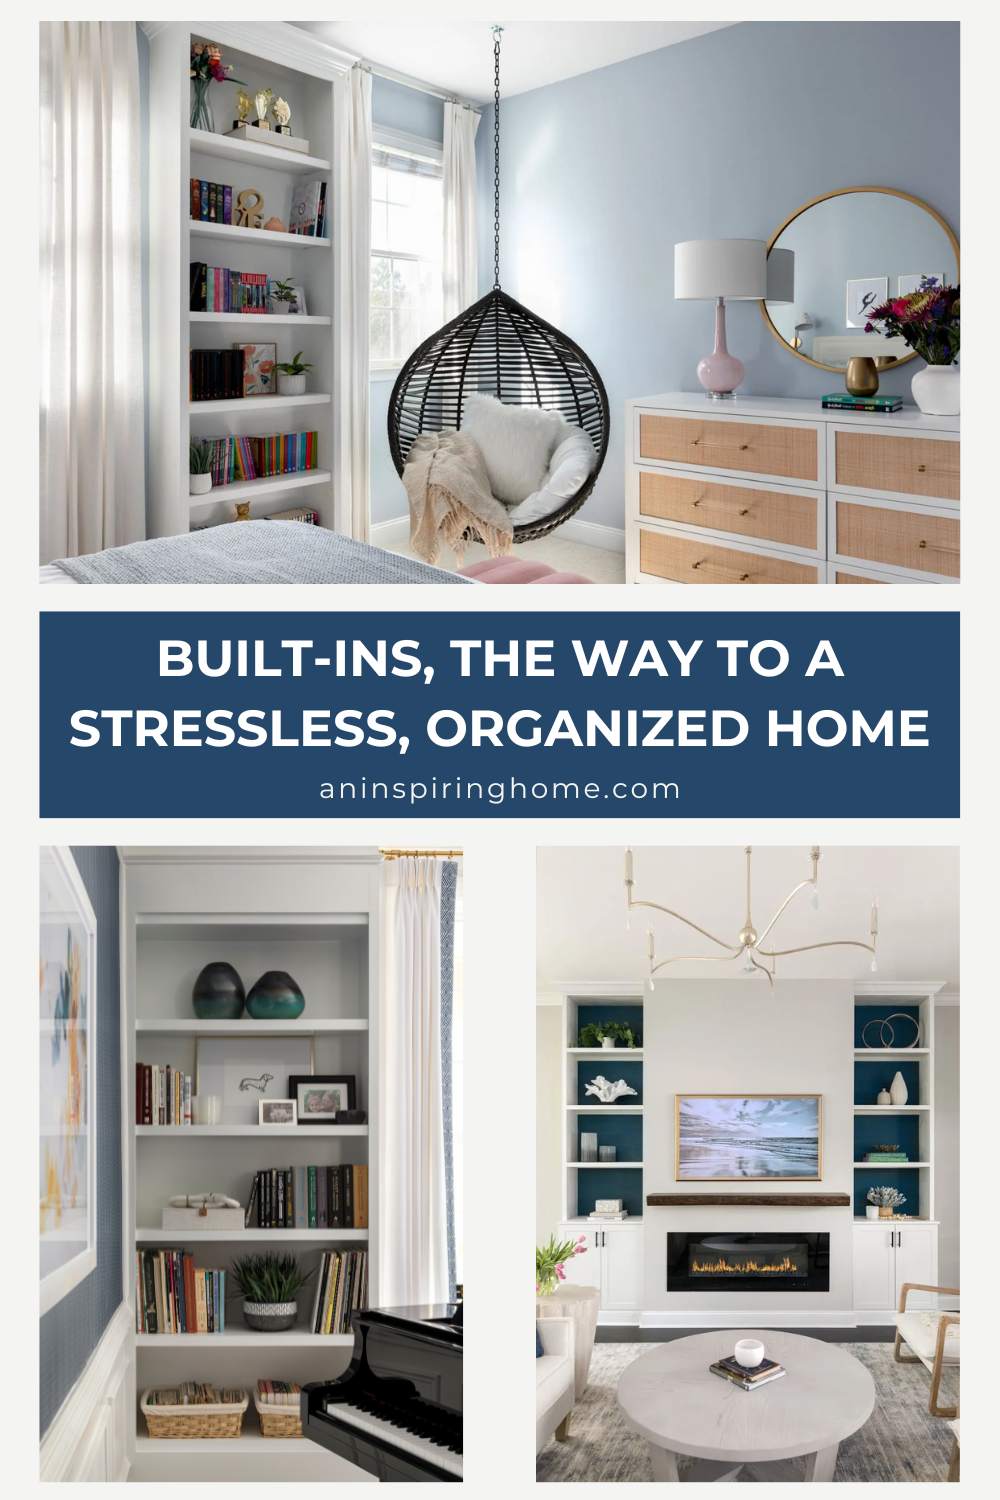 Built-ins, the Way to a Stressless, Organized Home